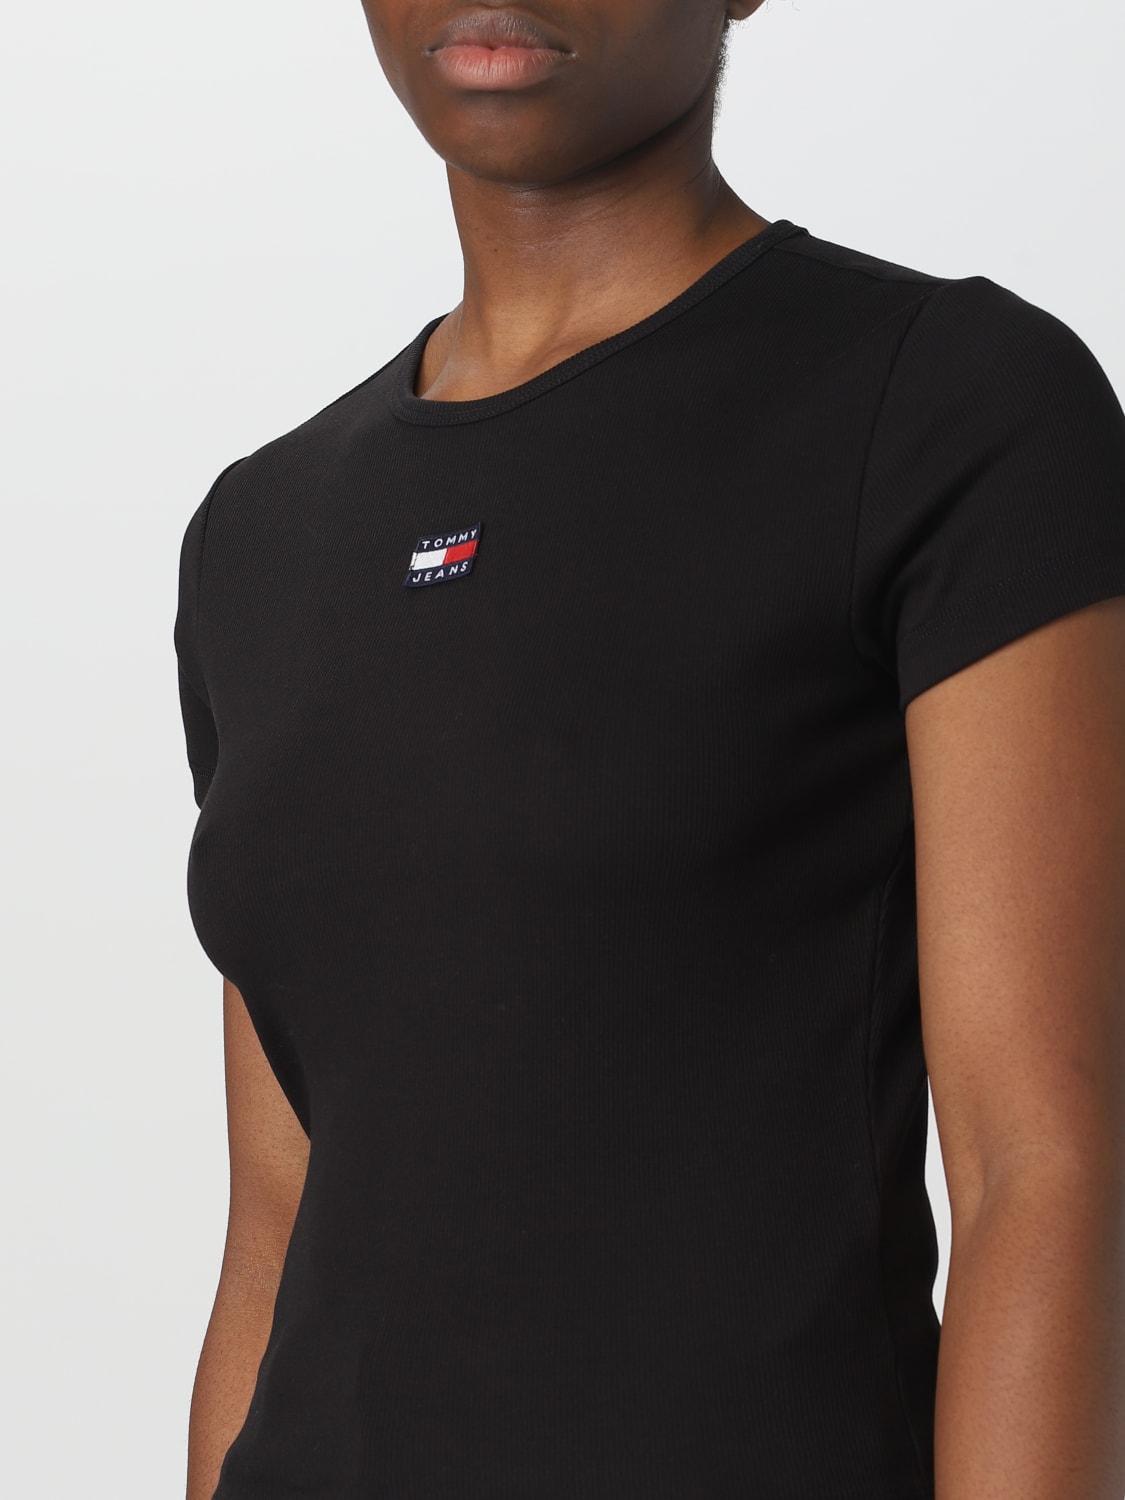 TOMMY JEANS: t-shirt for woman - Black | Tommy Jeans t-shirt DW0DW16259 ...